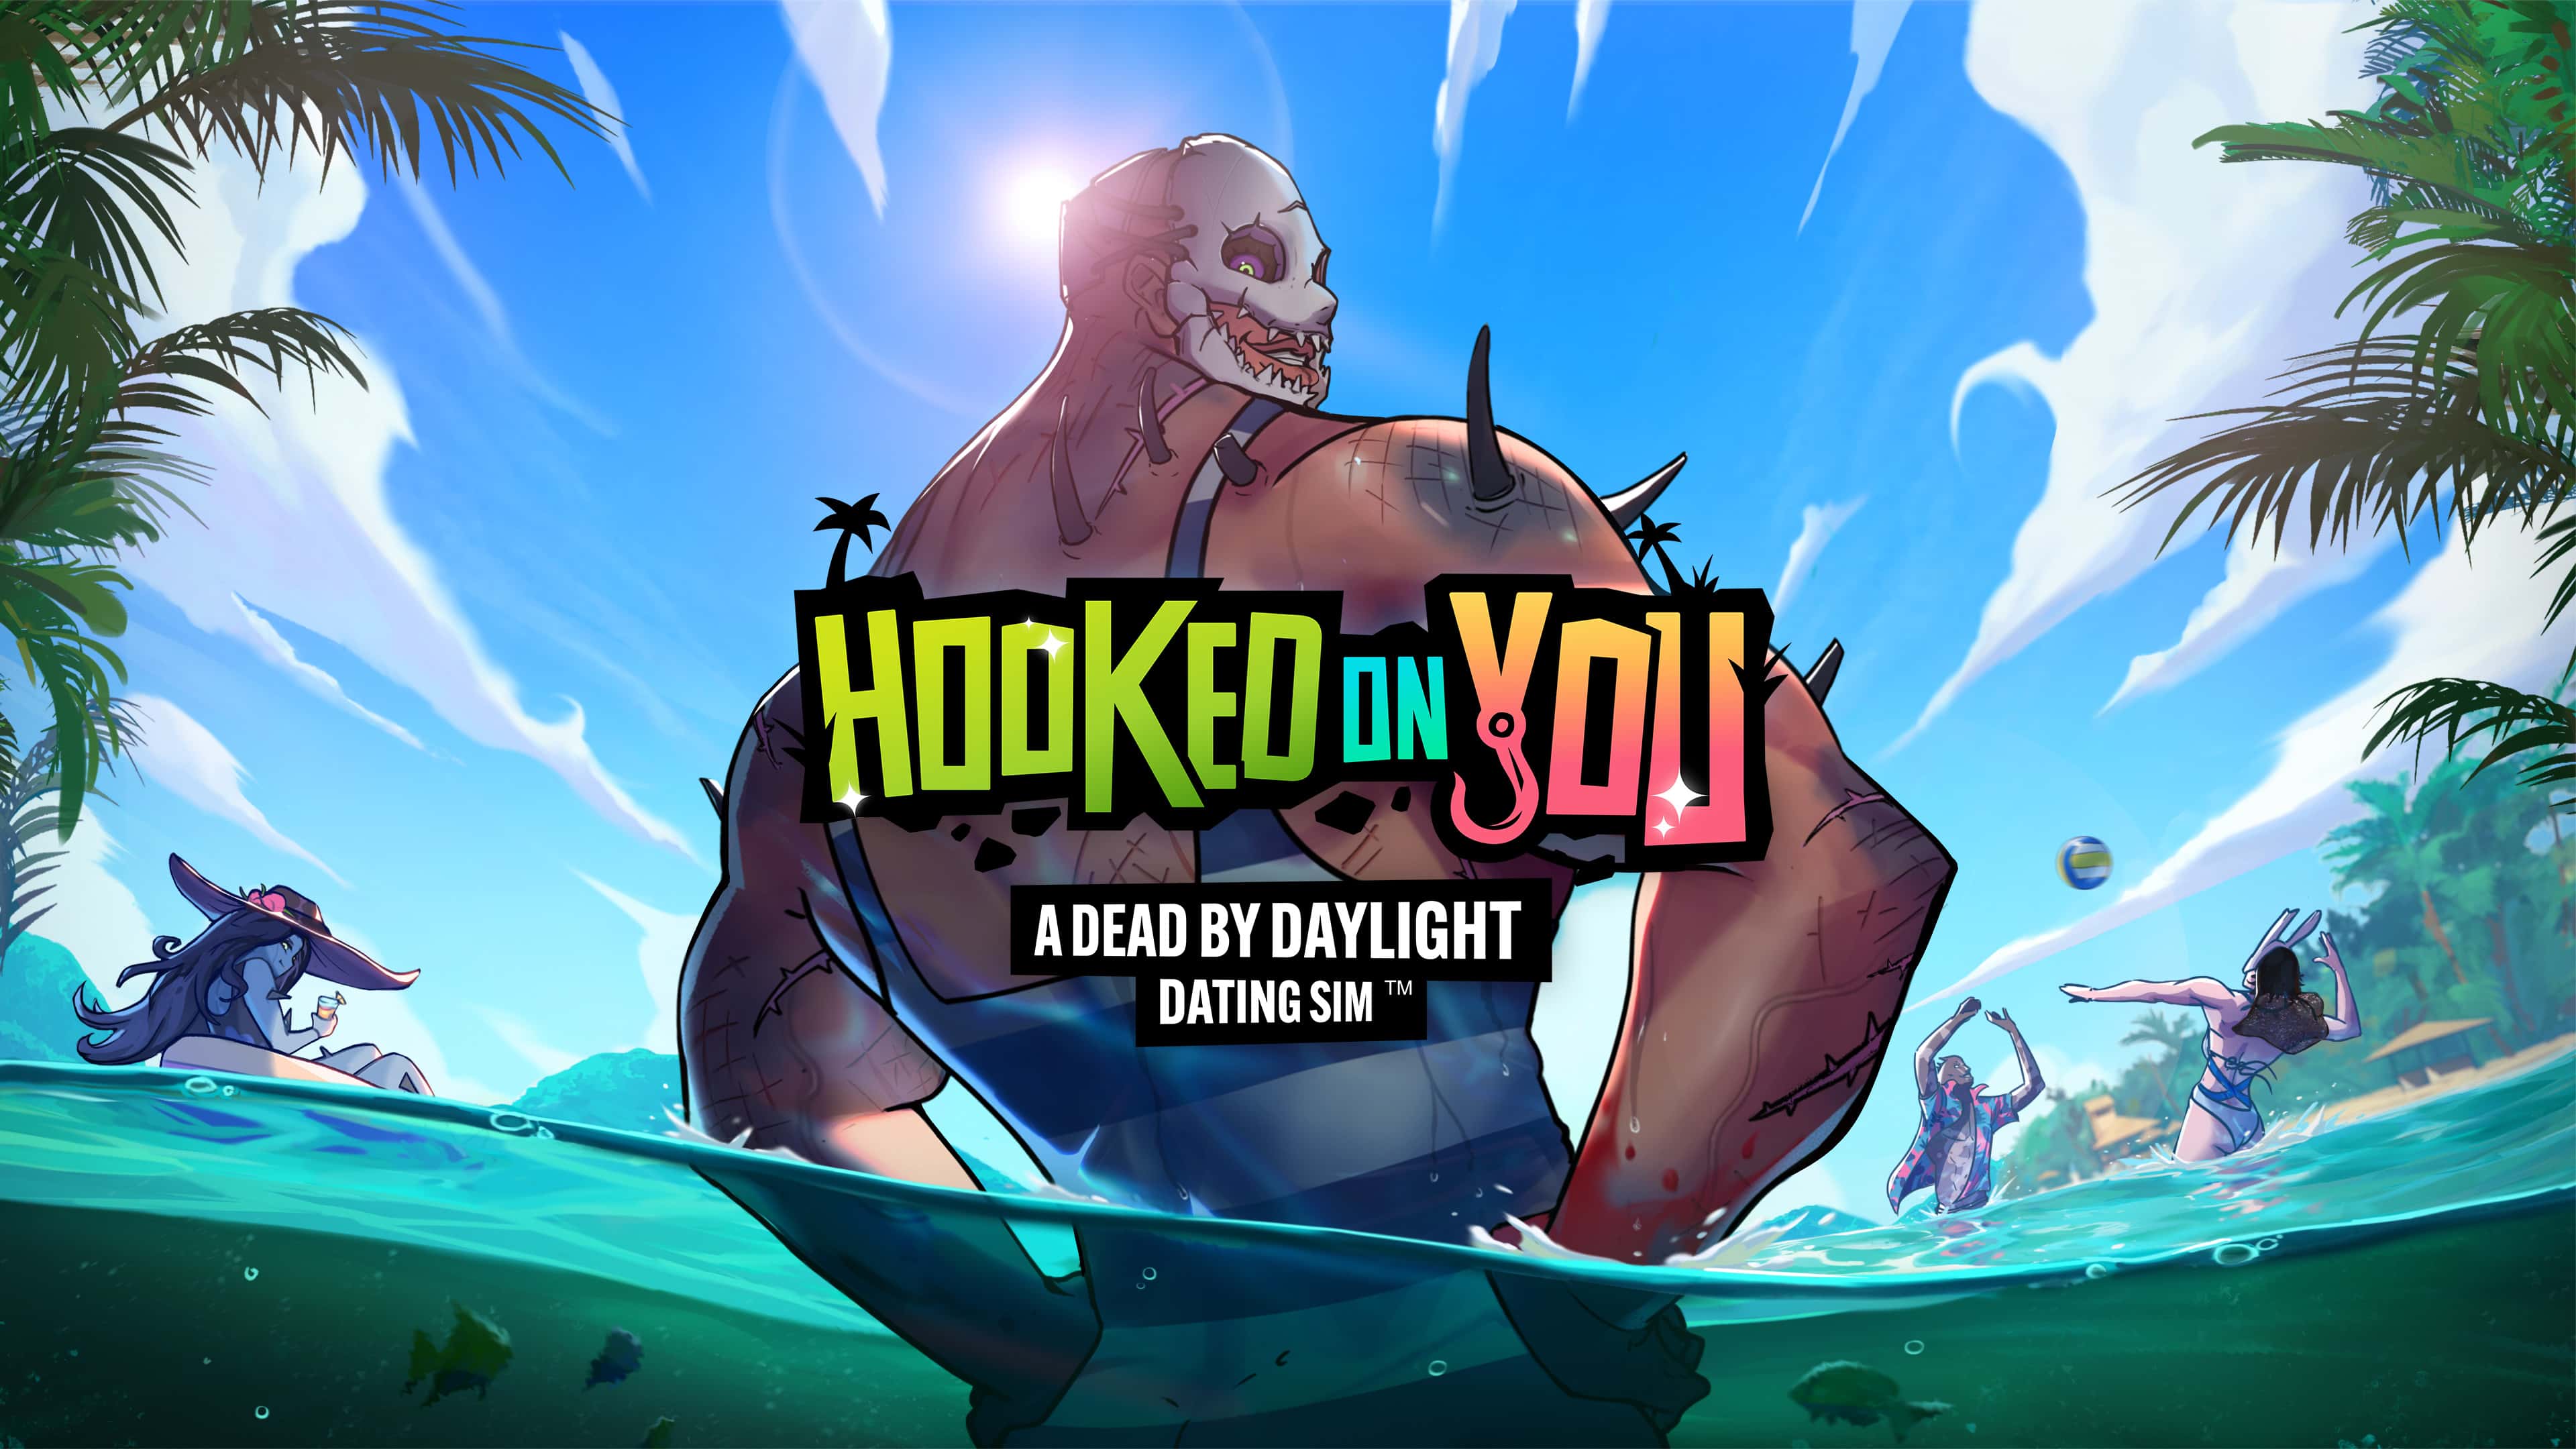 Hooked On You Review - A Love Letter to the Dead by Daylight Community -  Gayming Magazine